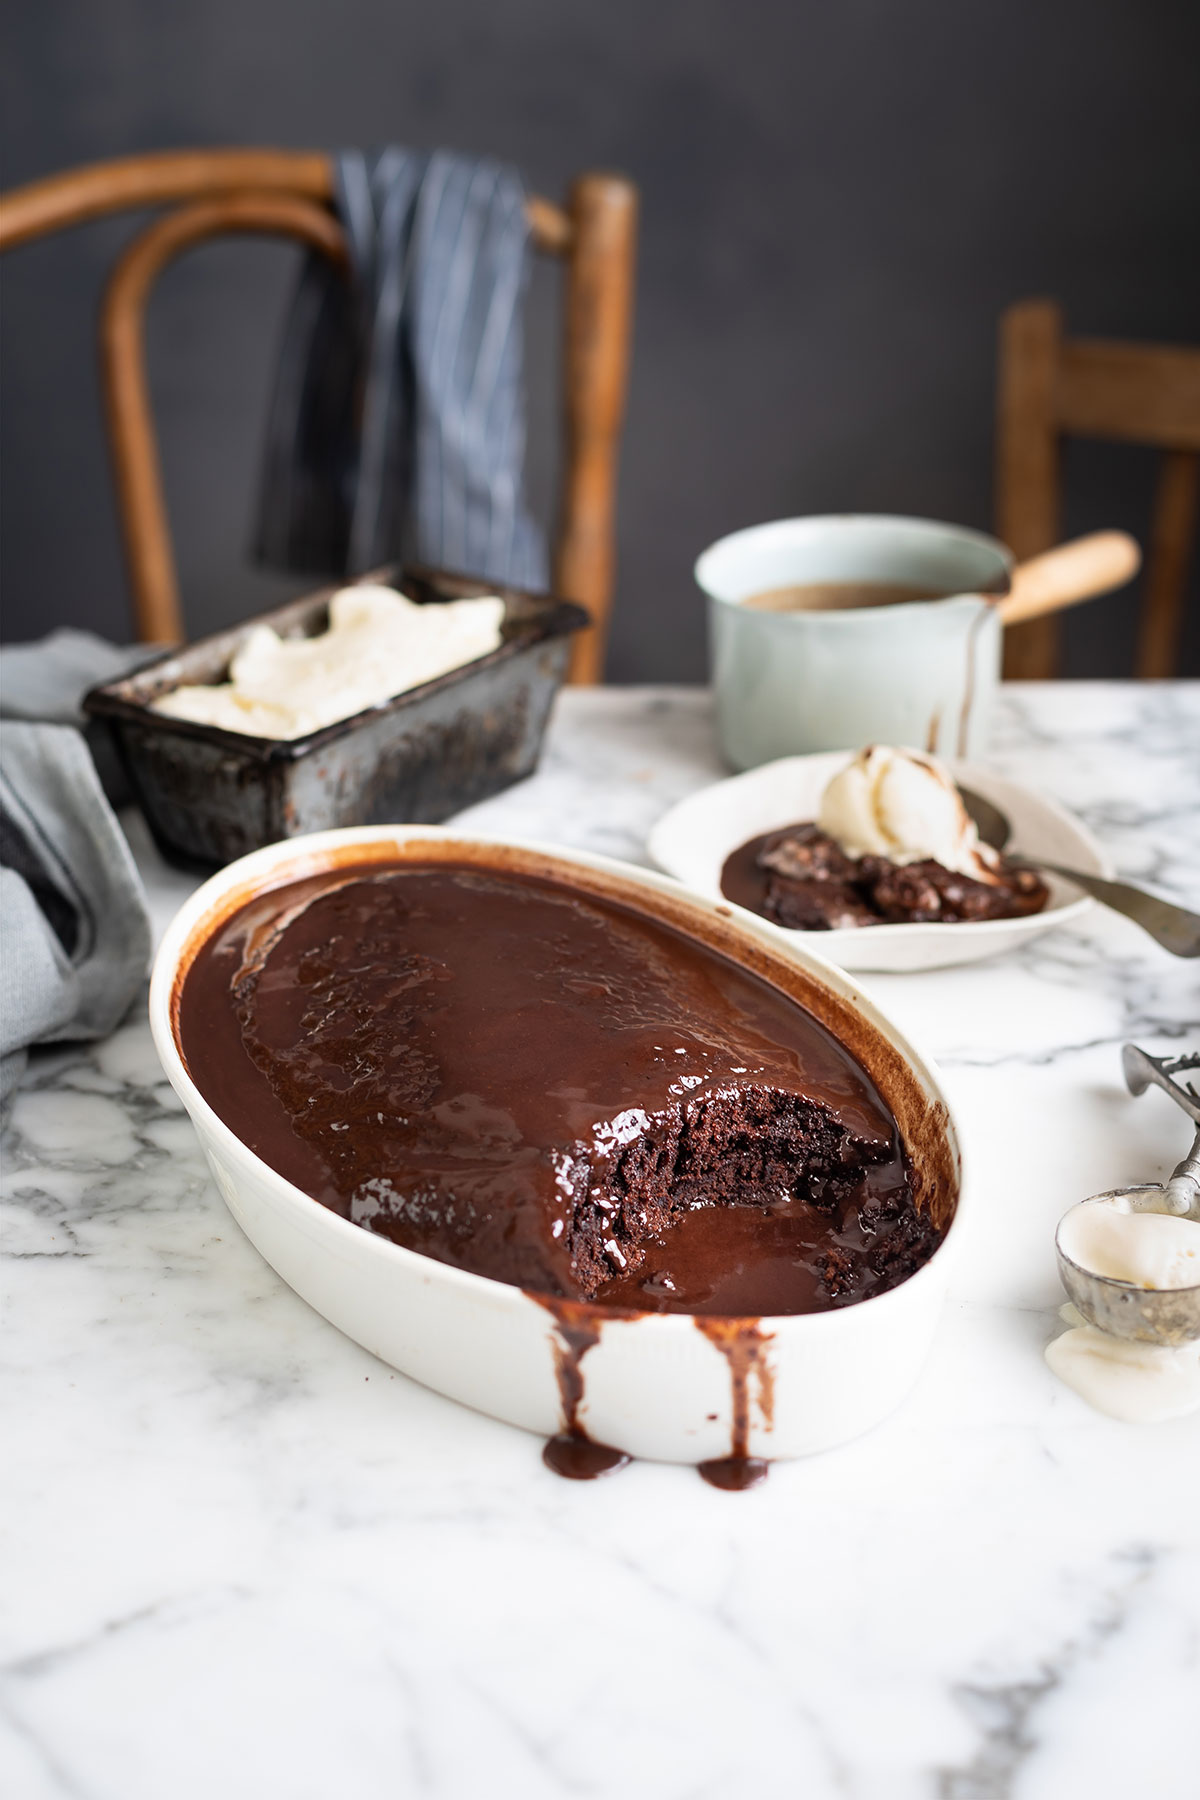 A baking dish with the best chocolate malva pudding and a portion scooped out